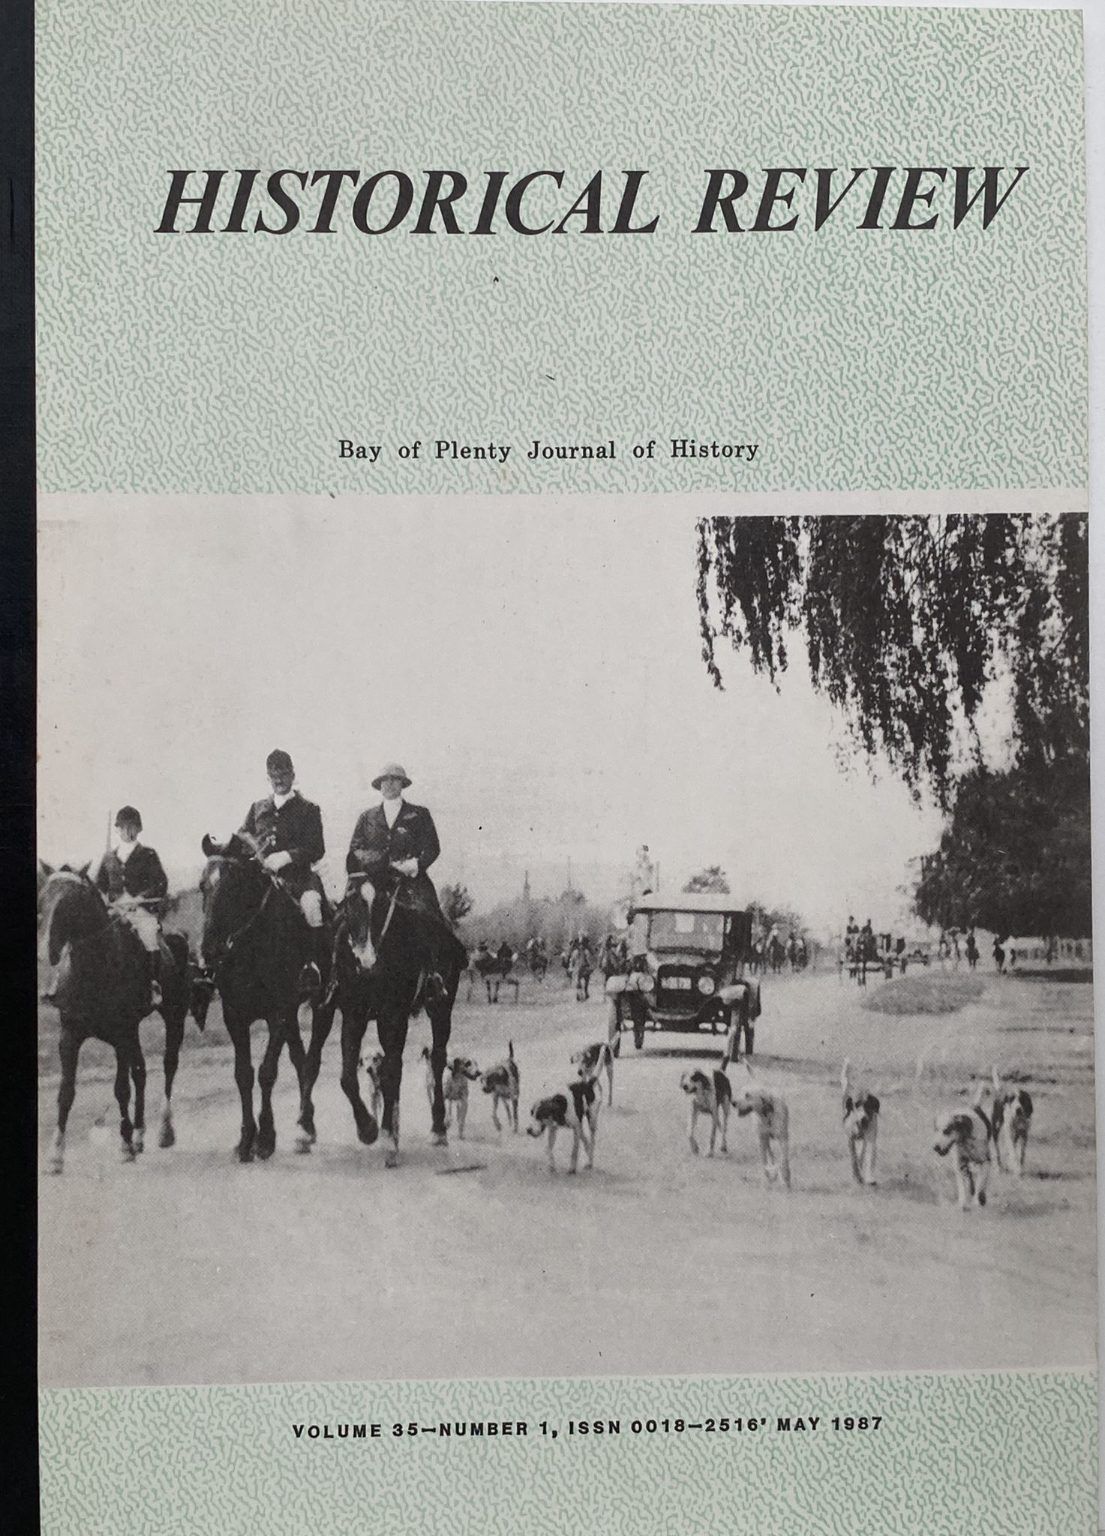 HISTORICAL REVIEW: Bay of Plenty Journal of History - Volume 35, Number 1